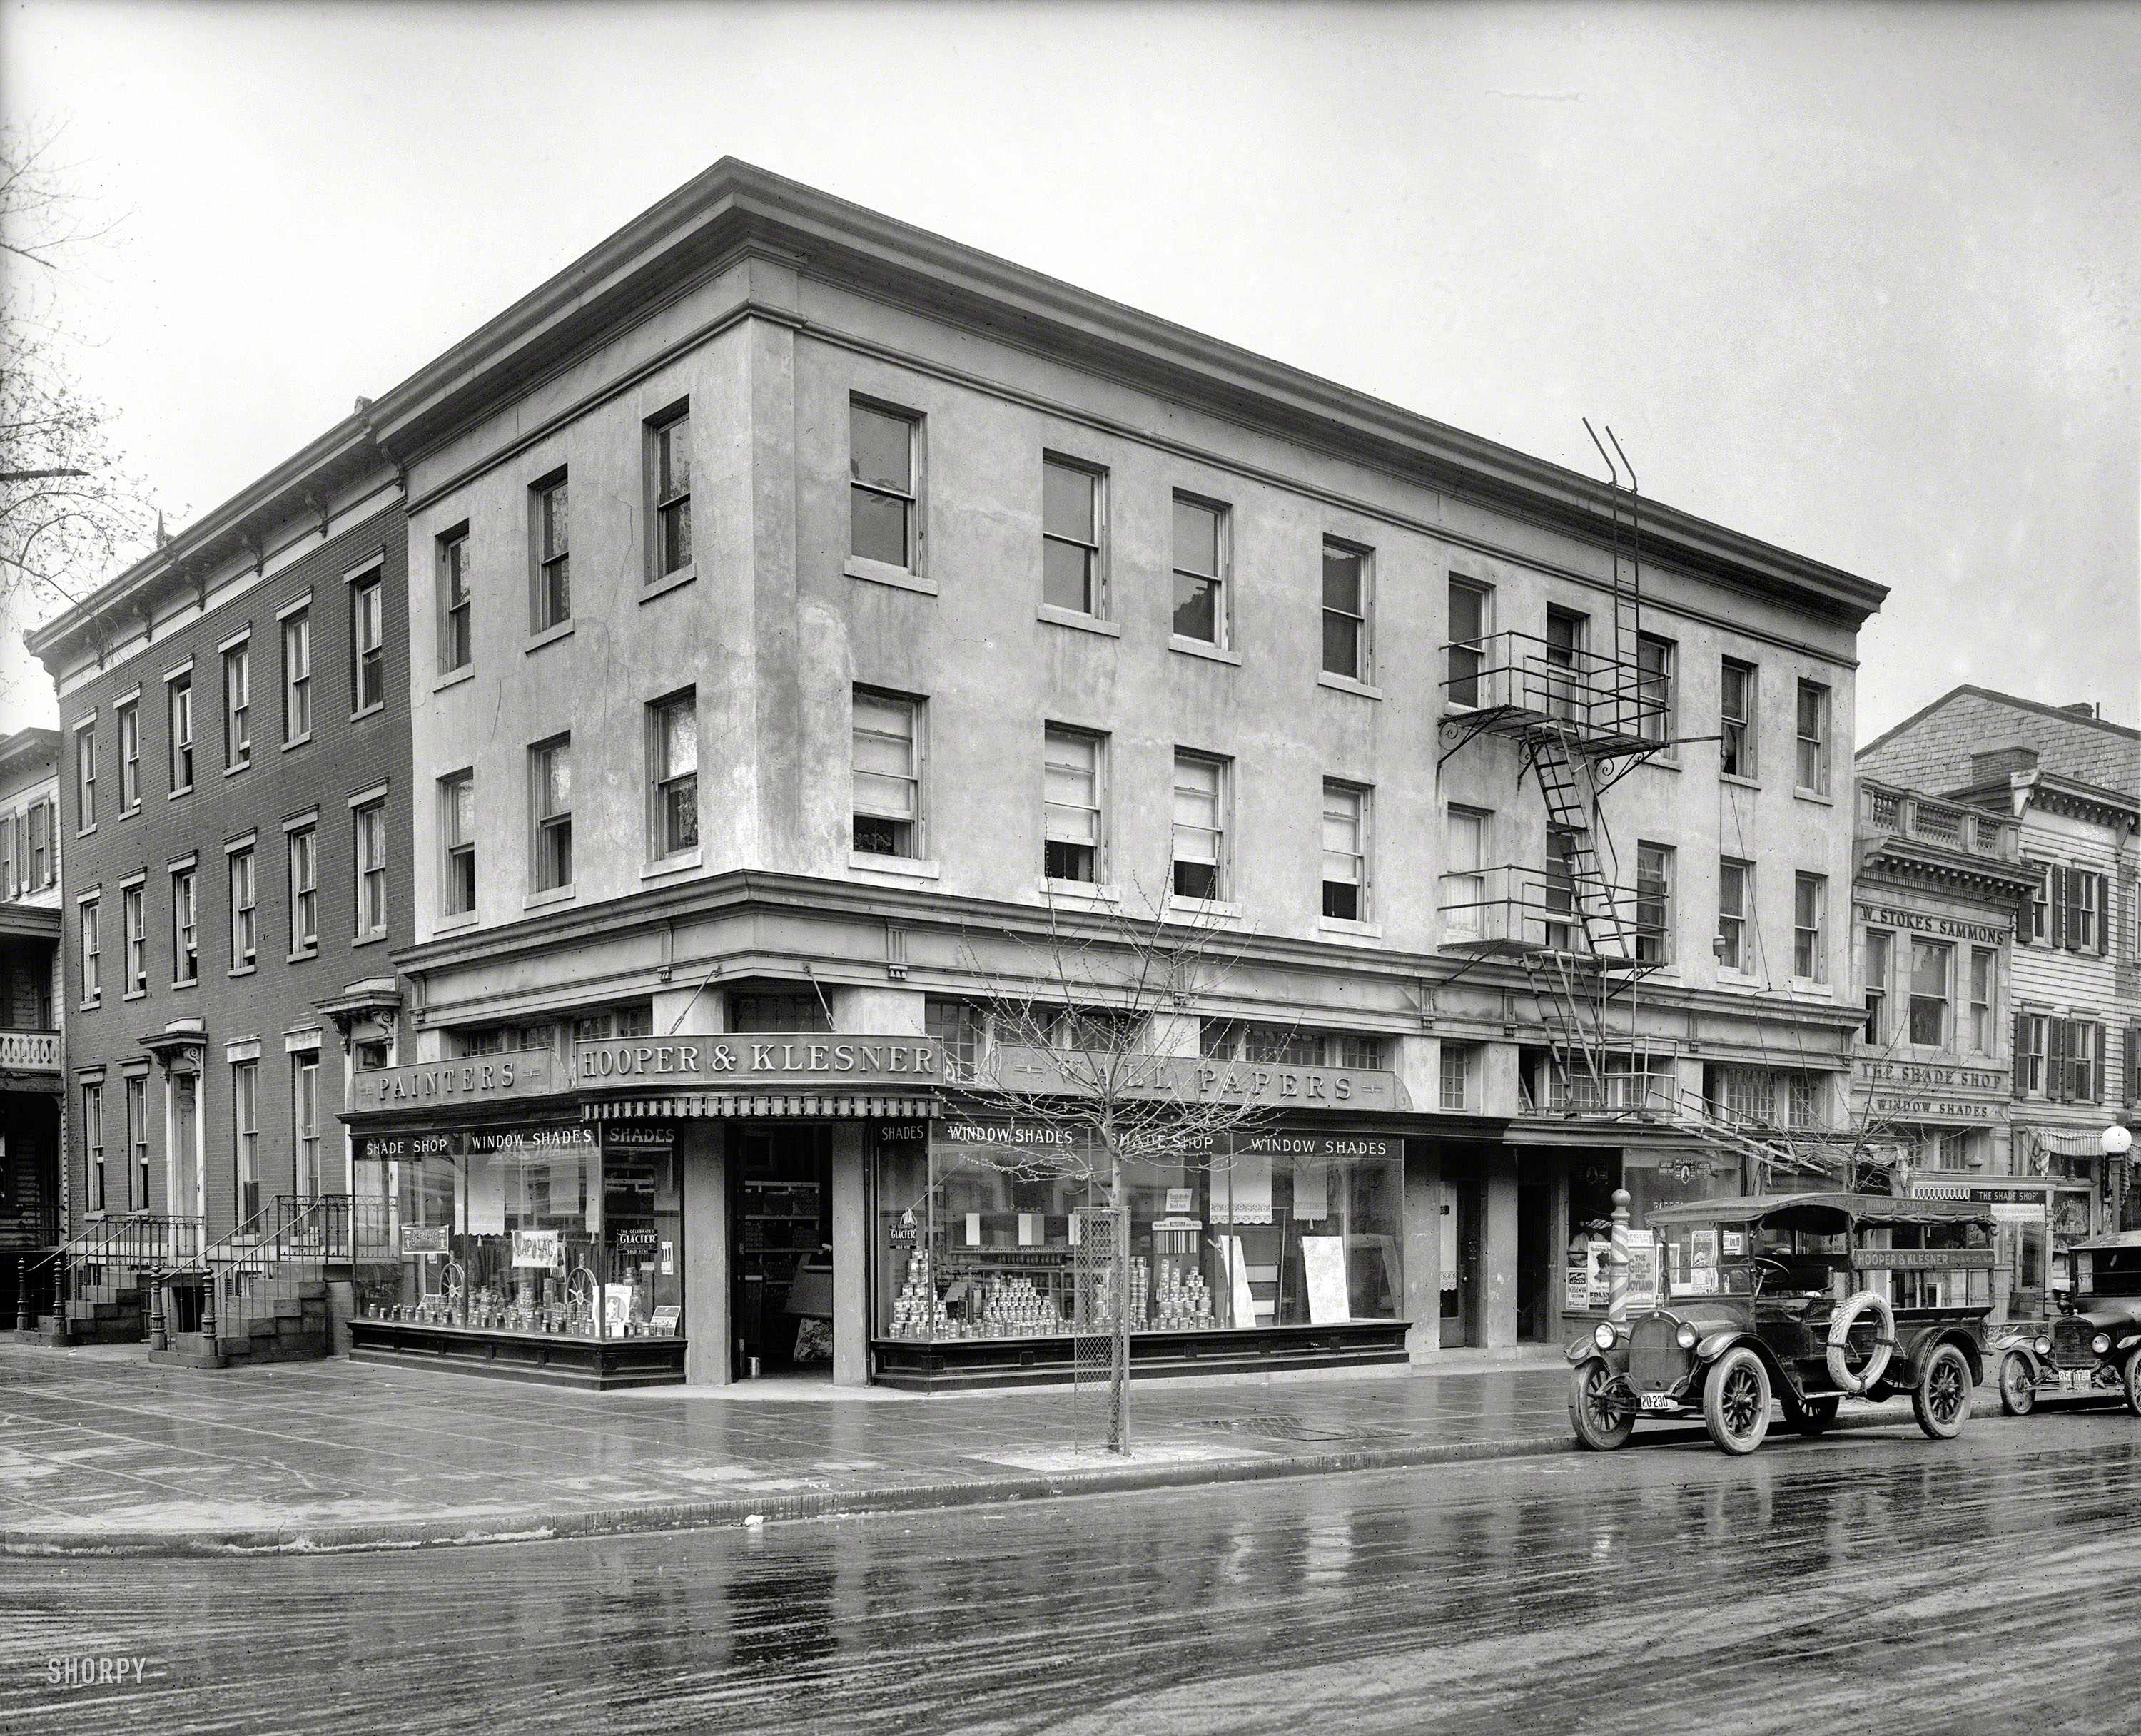 Washington, D.C., circa 1920. "Hooper & Klesner Building, 12th & H Streets." This block would seem to be Windowshade Central for the nation's capital. National Photo Company Collection glass negative. View full size.